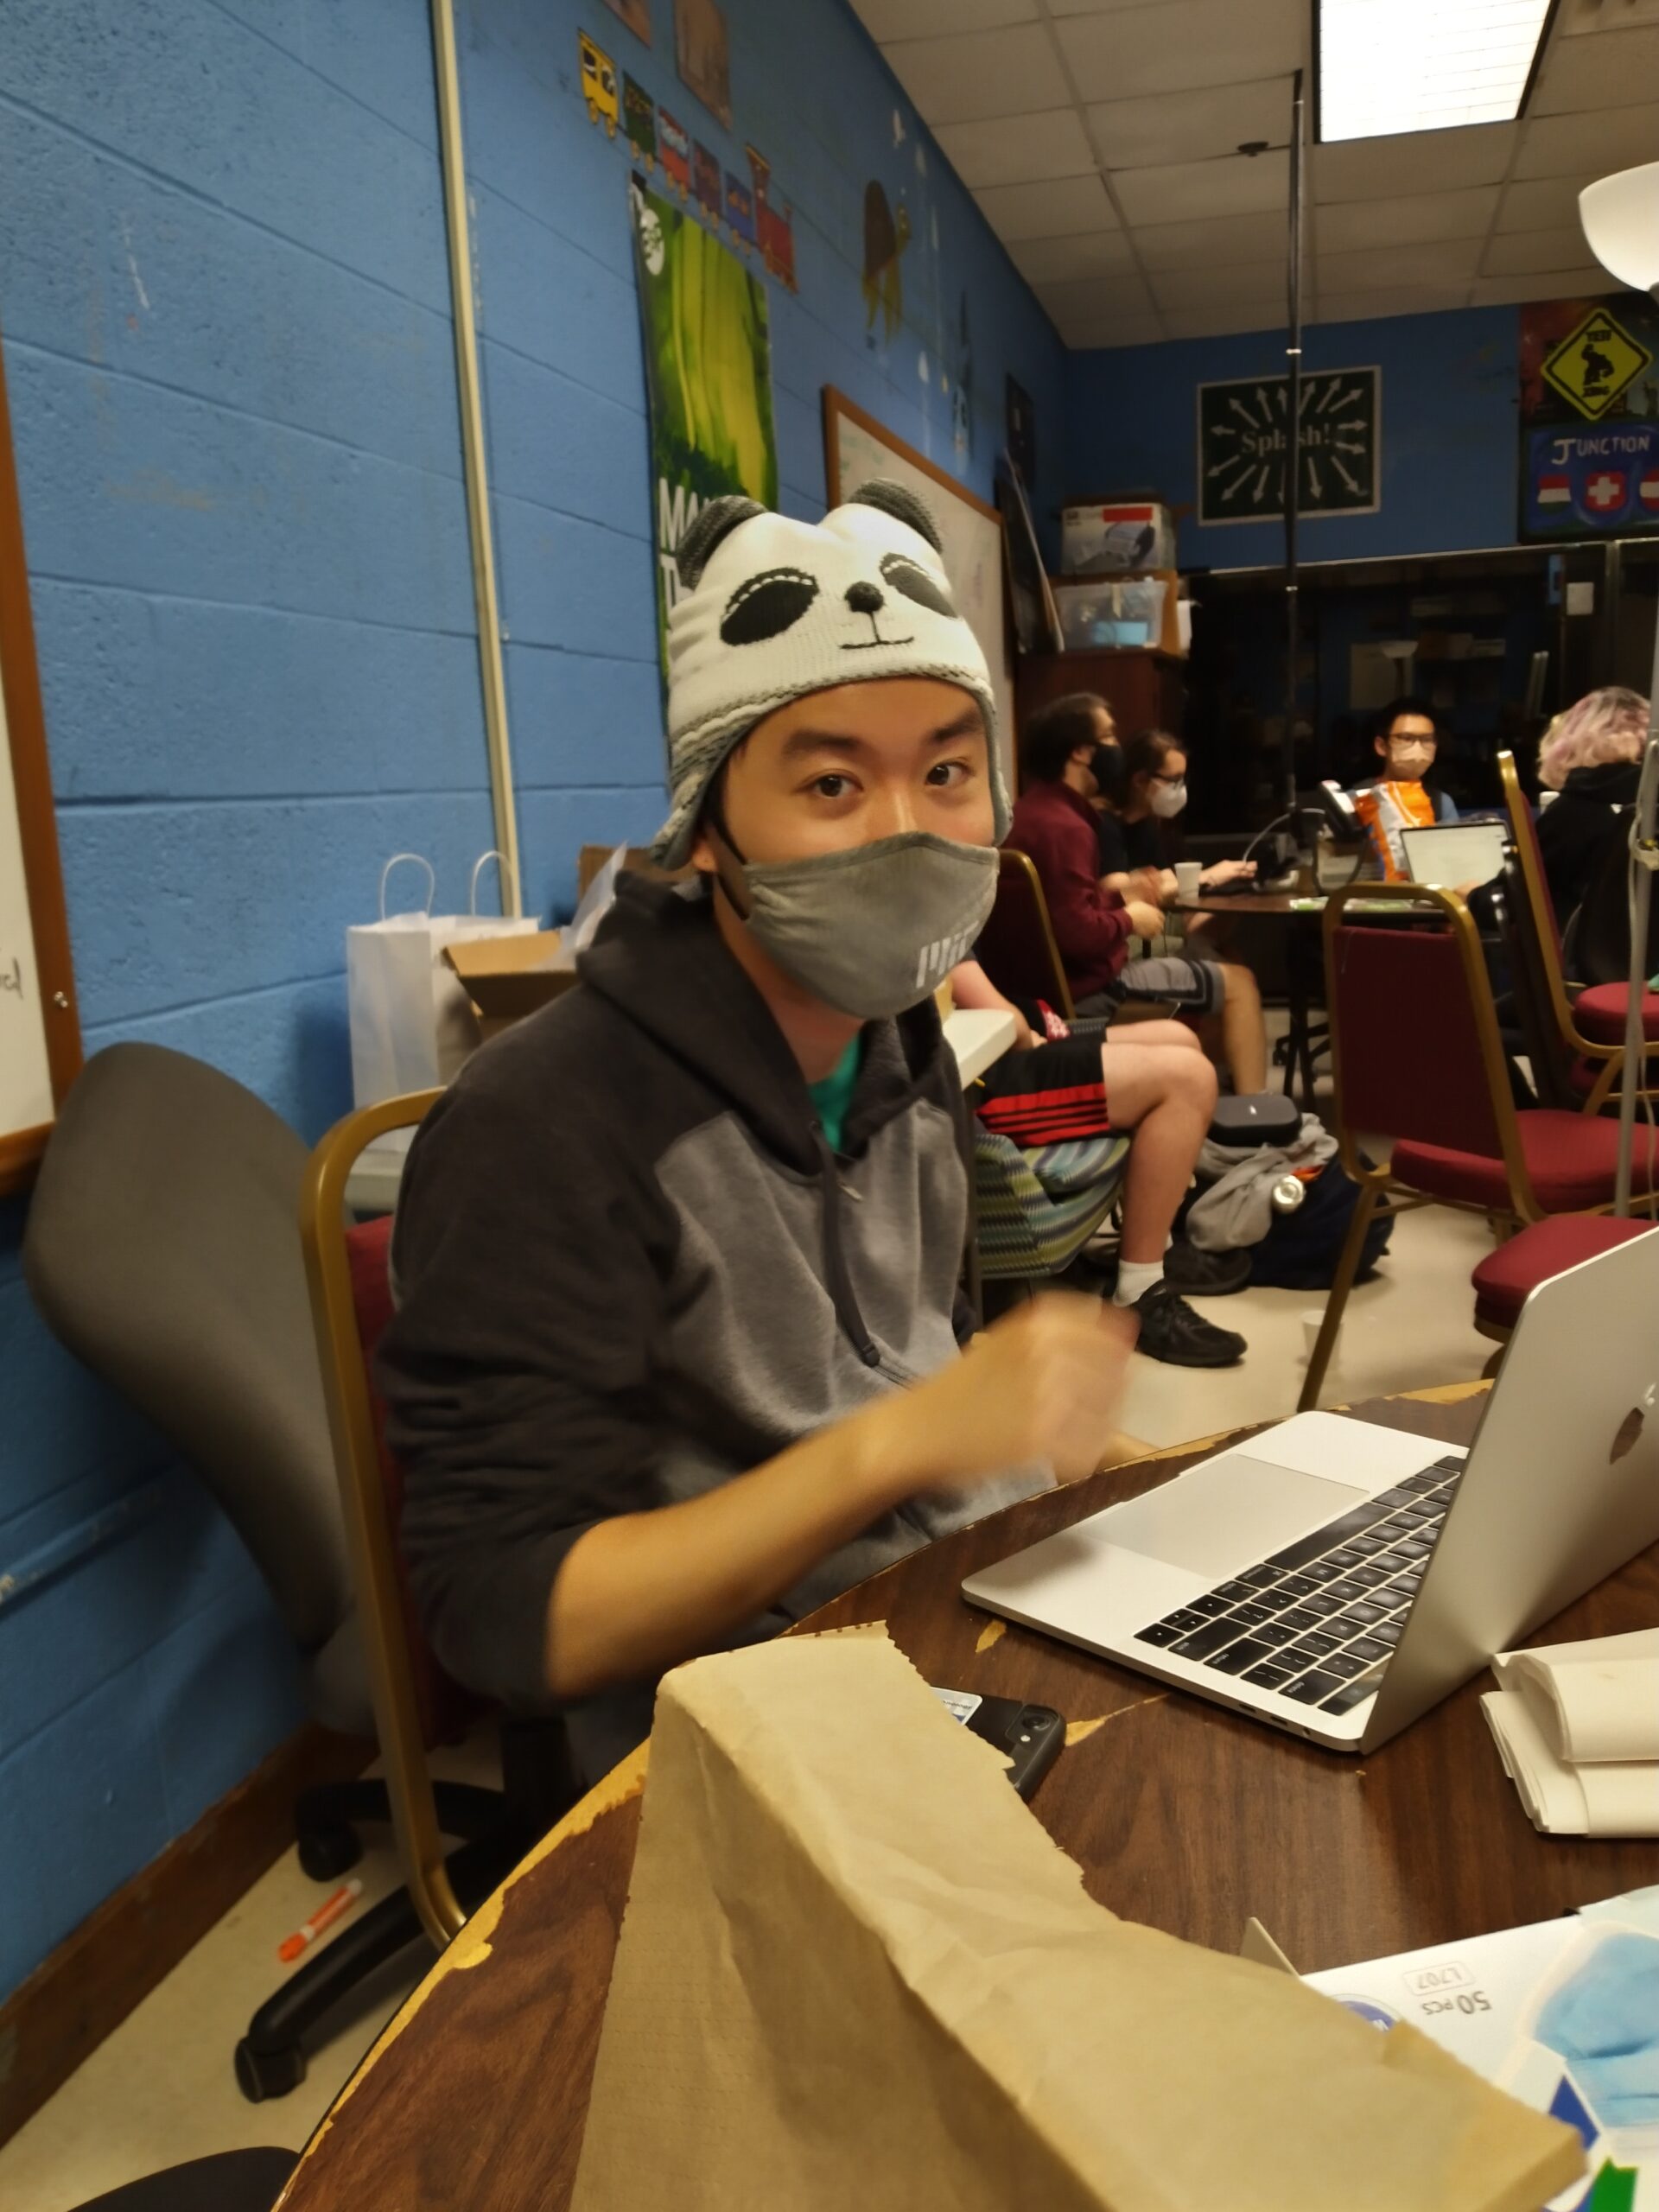 someone wearing a panda hat in front of a laptop